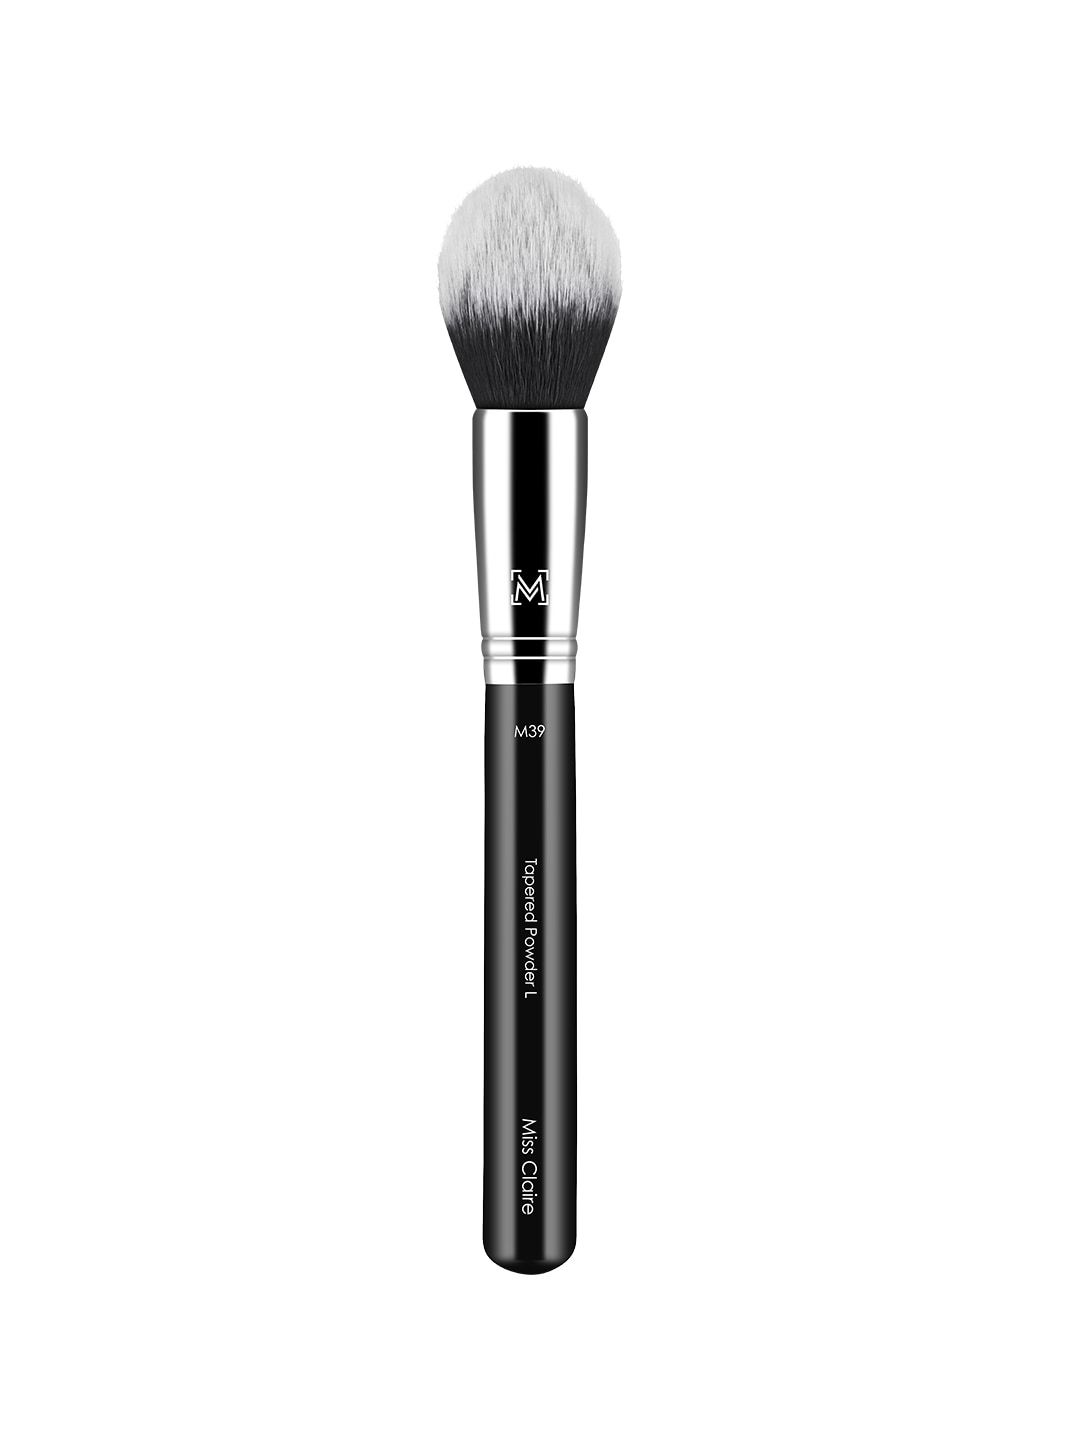 Miss Claire Chrome Tapered Powder Brush - M39 Black & Silver-Toned Price in India